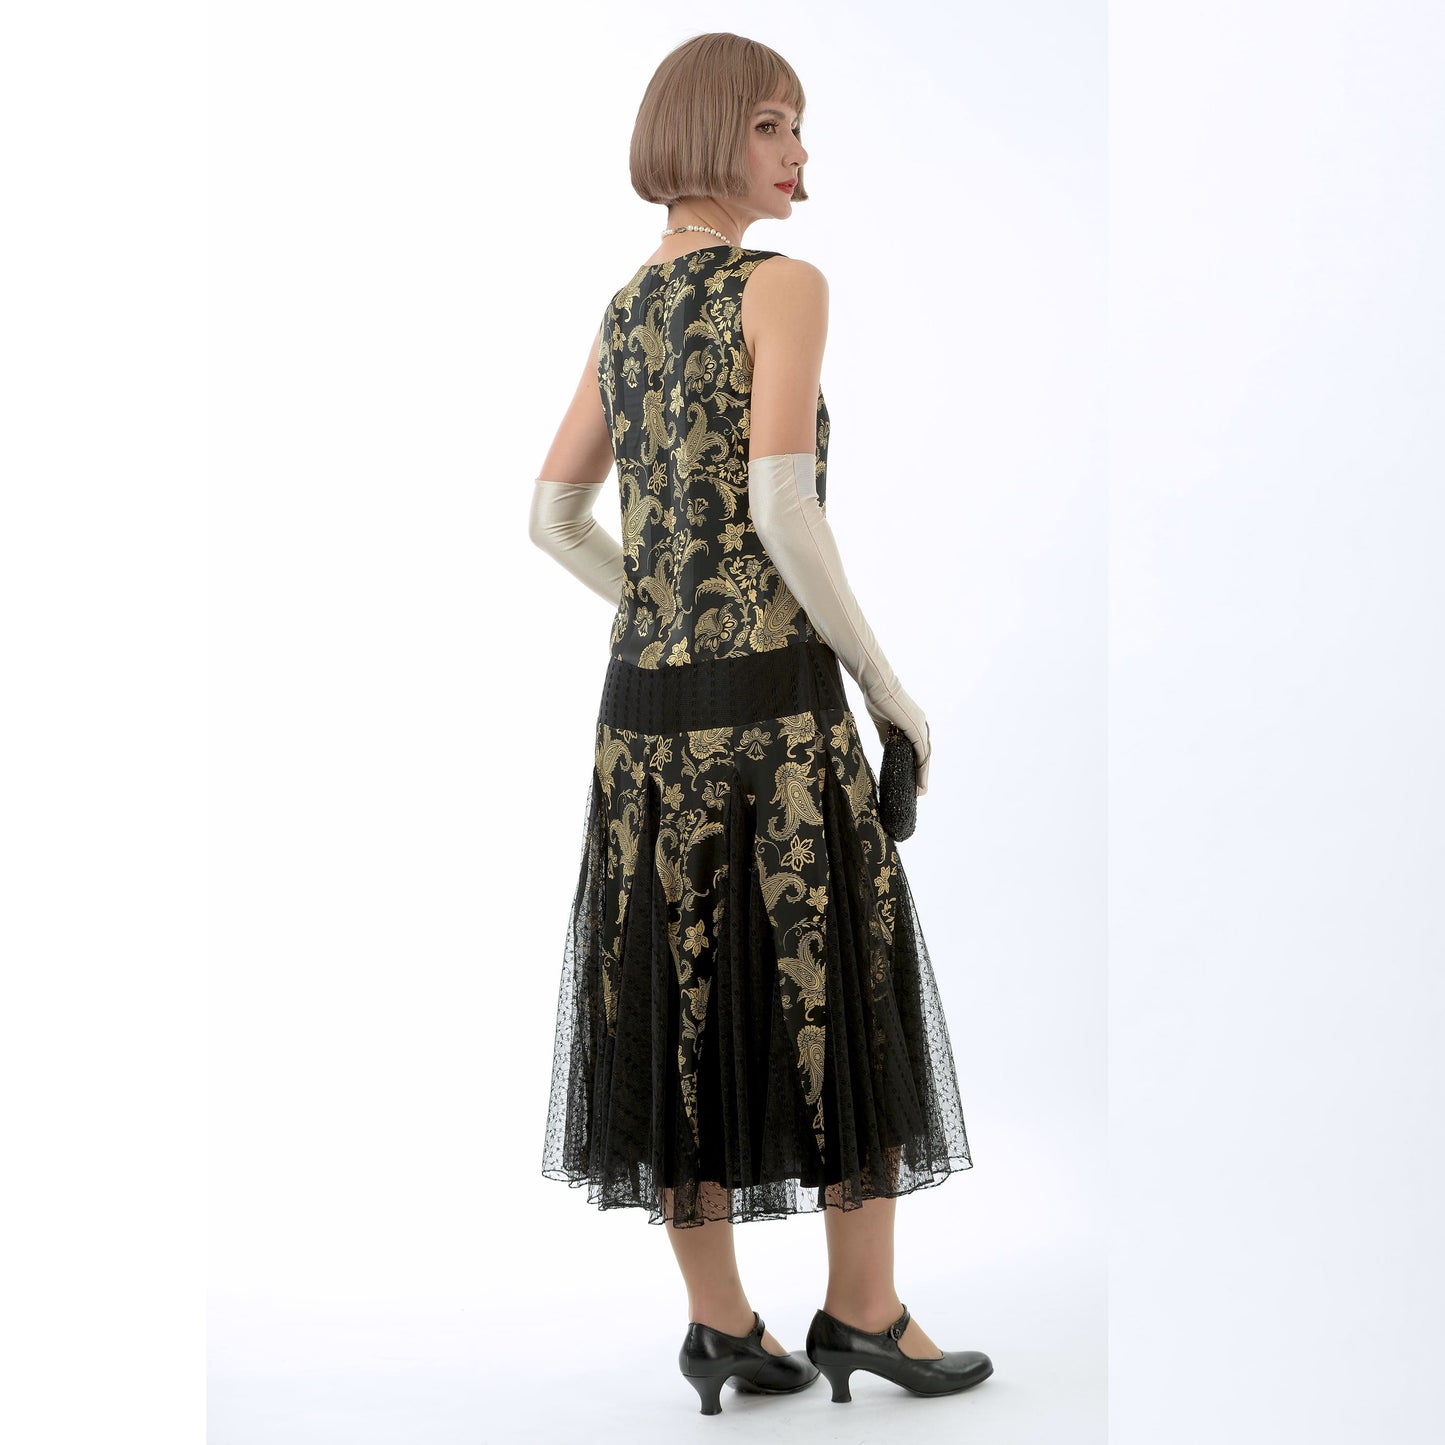 1920s evening dress in black and gold satin with black skirt godets